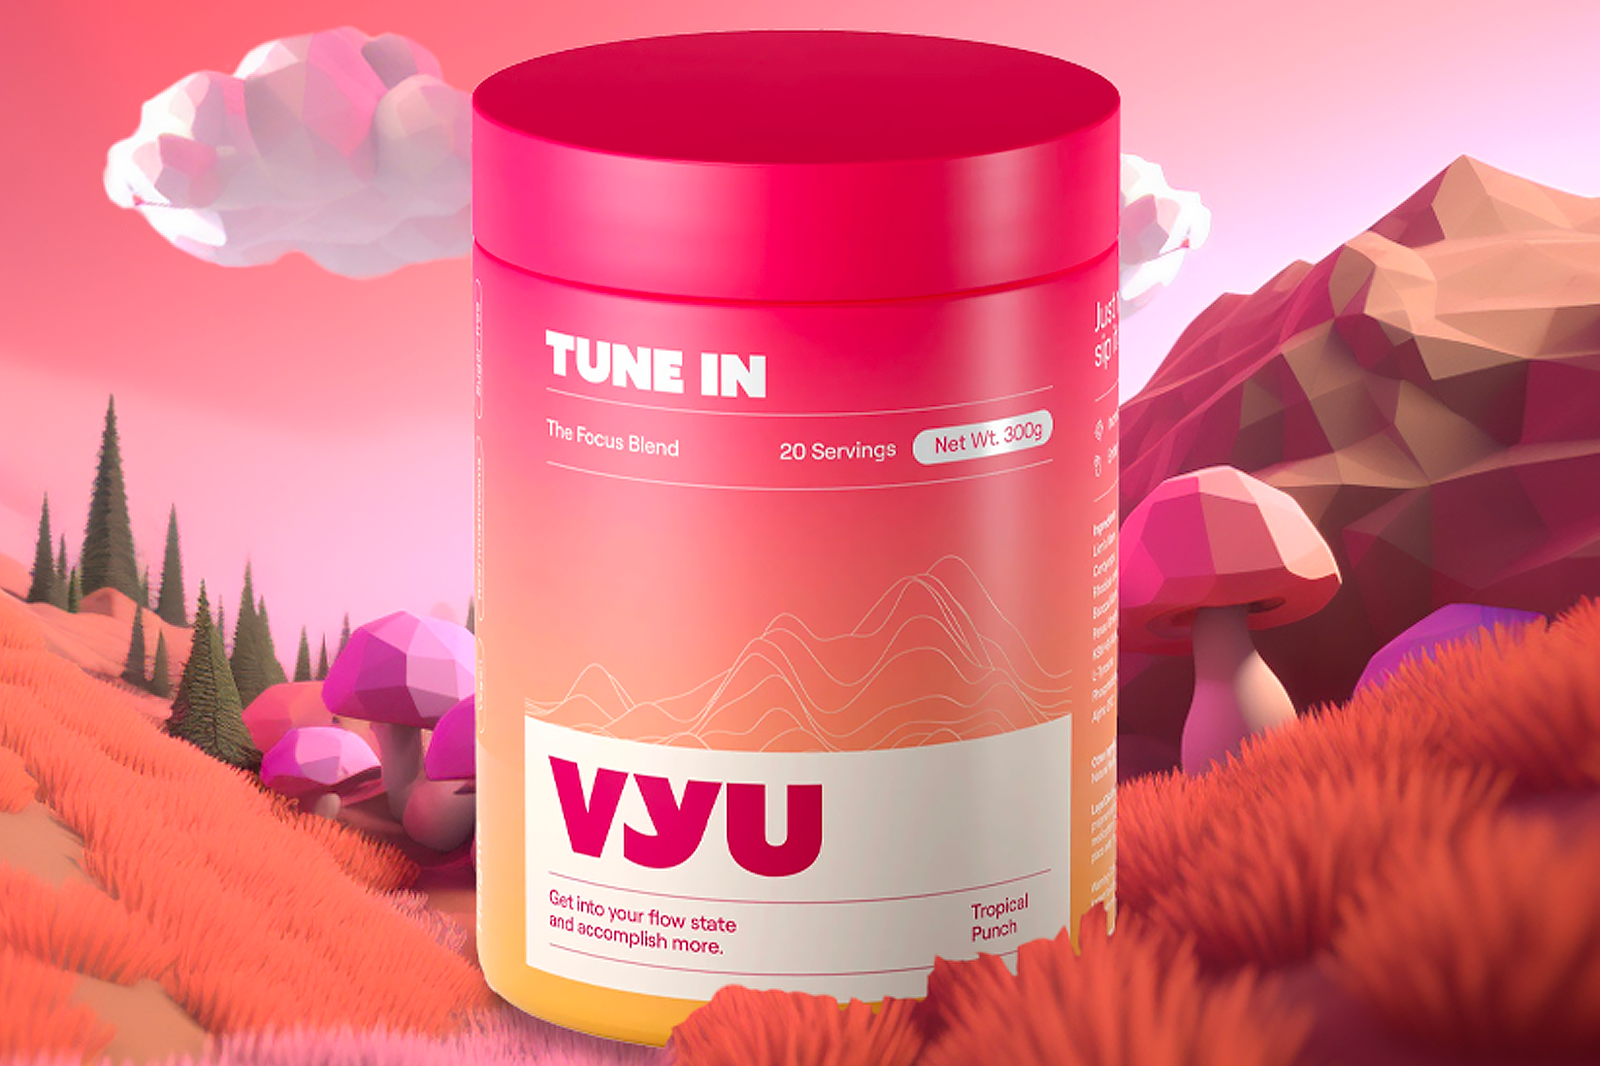 A container of VYU TUNE IN in Tropical Punch flavor is placed on a road with mountains and some trees in the background